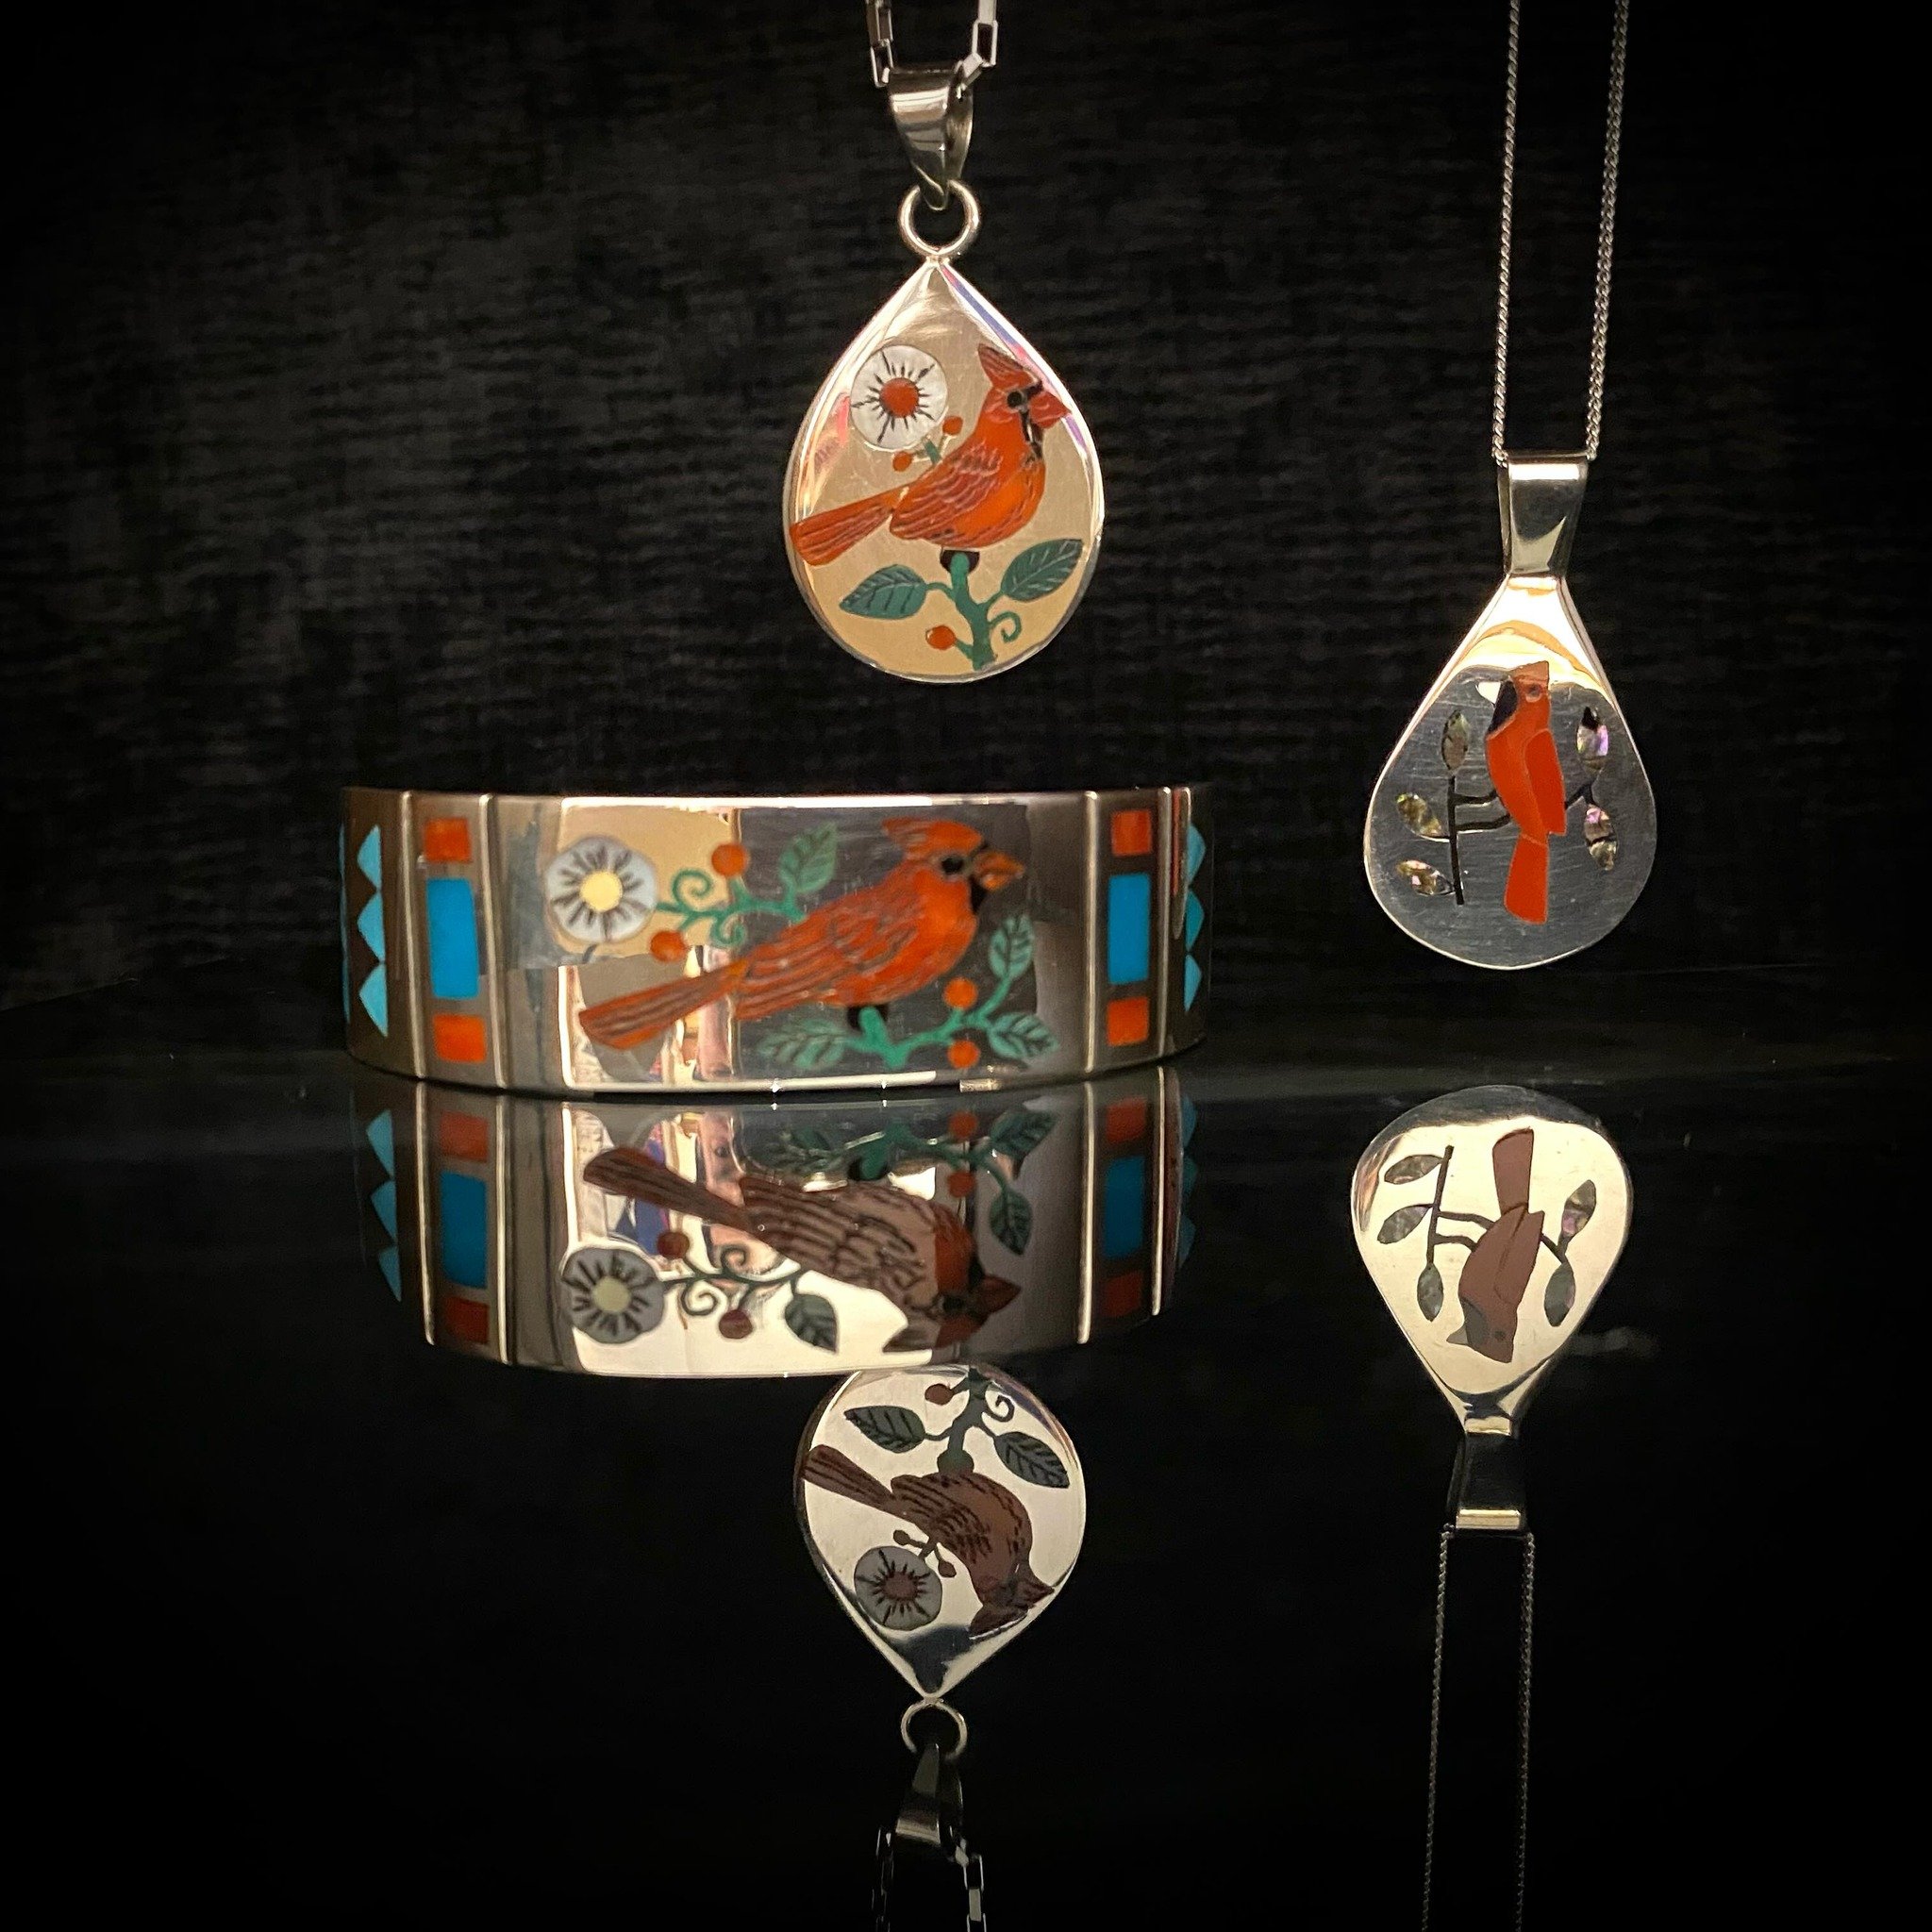 A little bird told me&hellip;❤️❤️❤️ Some Luxurious Zuni Cardinals ❤️❤️❤️ an ancient tradition , here done in coral, turquoise, malachite &amp; mother of Pearl &hellip; on sterling silver&hellip; a lifetime of treasuring &hellip; #SouthWestTrader #Mot